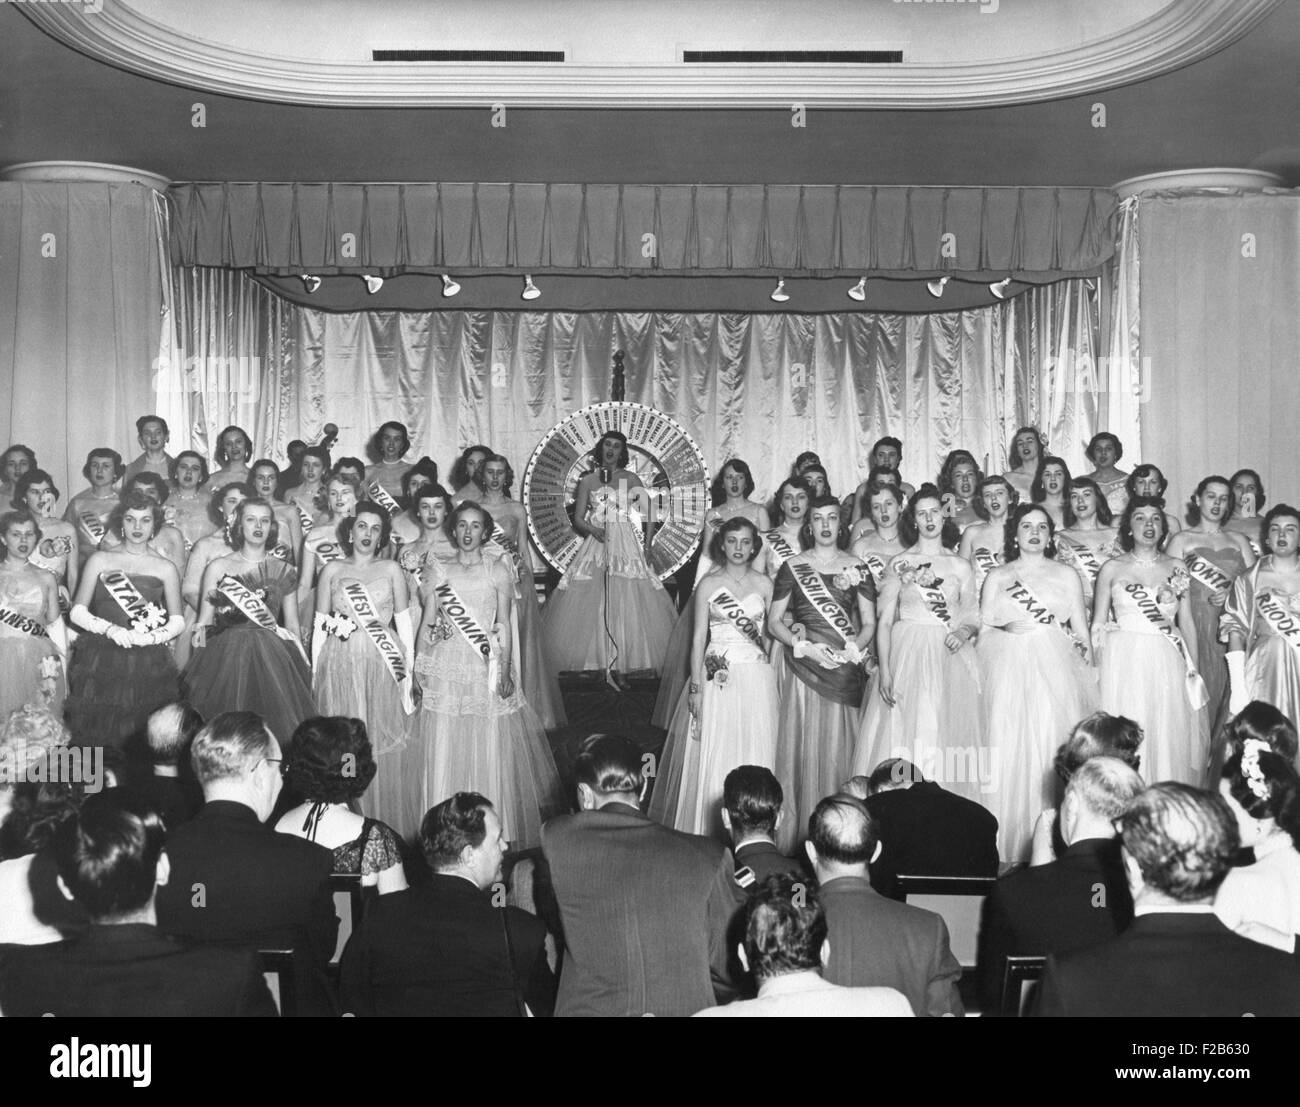 1953 Cherry Blossom Queen Contestants, called 'Princesses', April 10, 1953. At center is the winner, the 'Queen'. National Cherry Blossom Festival commemorated the 1912 gift of 3,000 cherry trees from Mayor Yukio Ozaki of Tokyo to the city of Washington, DC. - (BSLOC 2014 16 156) Stock Photo